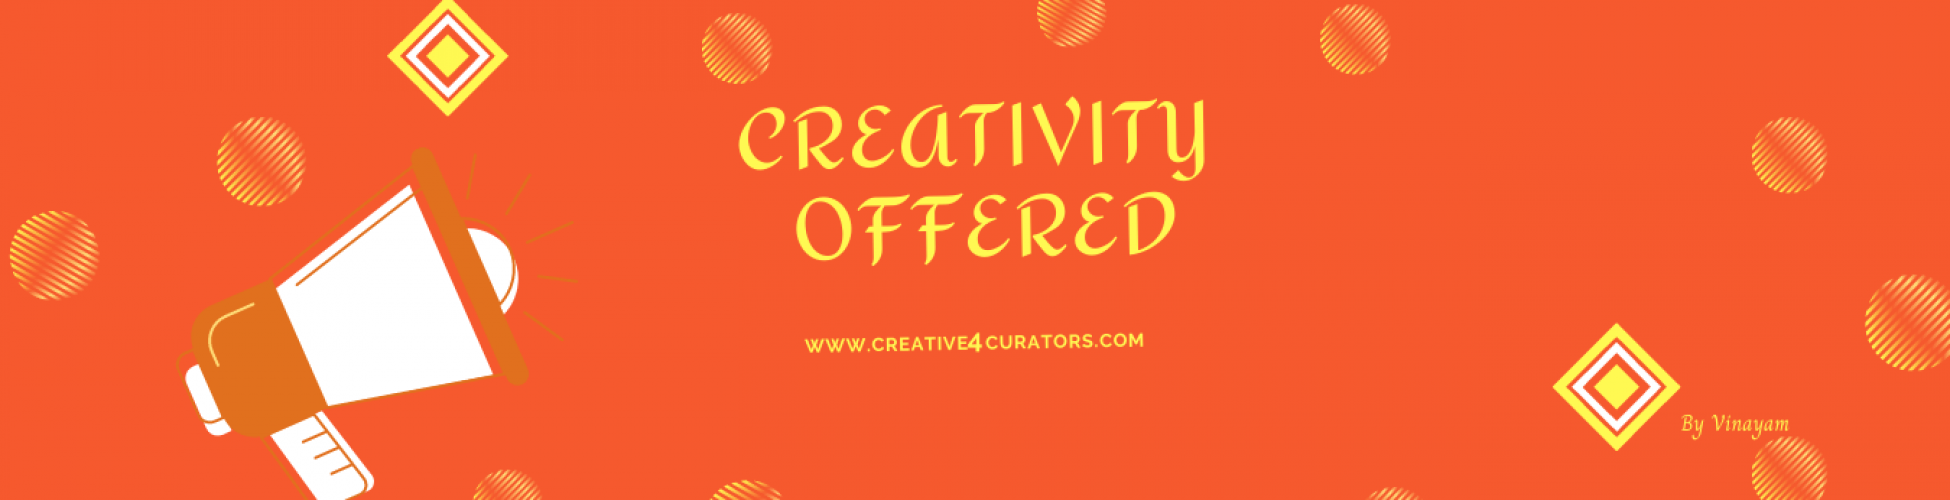 service- creativity offered by creative4curators